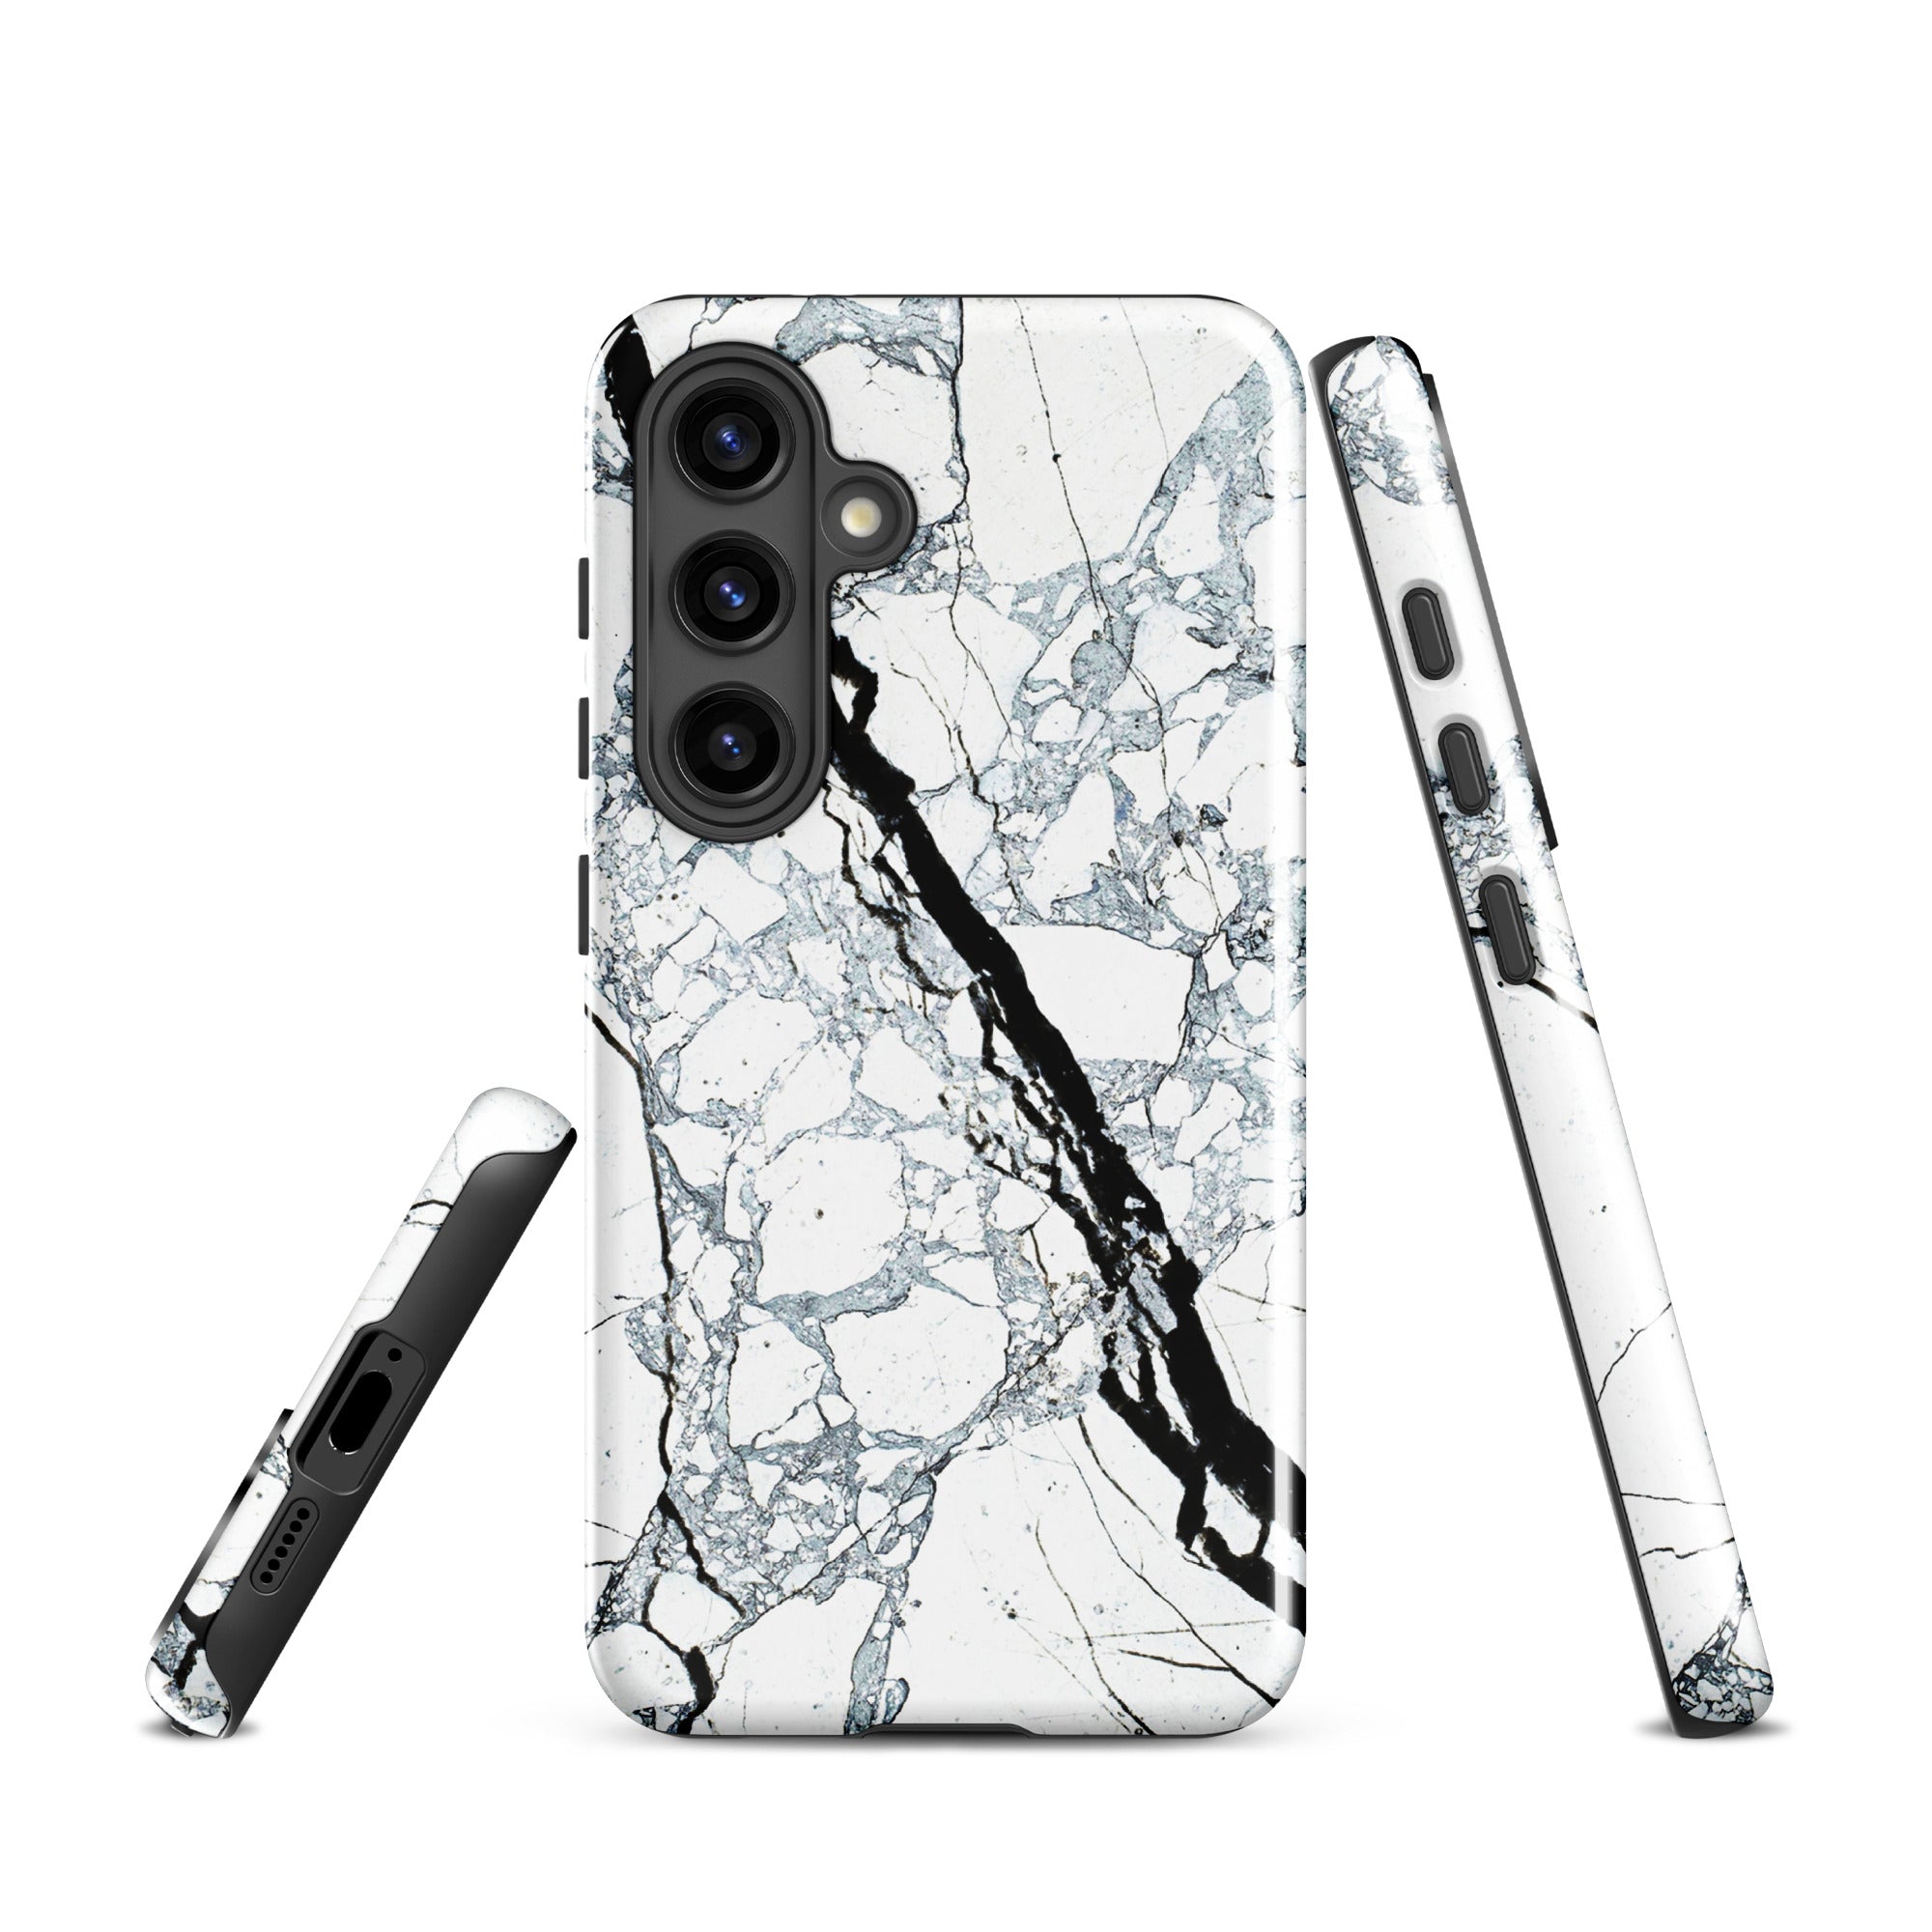 Tough case for Samsung®- Marble Black and White